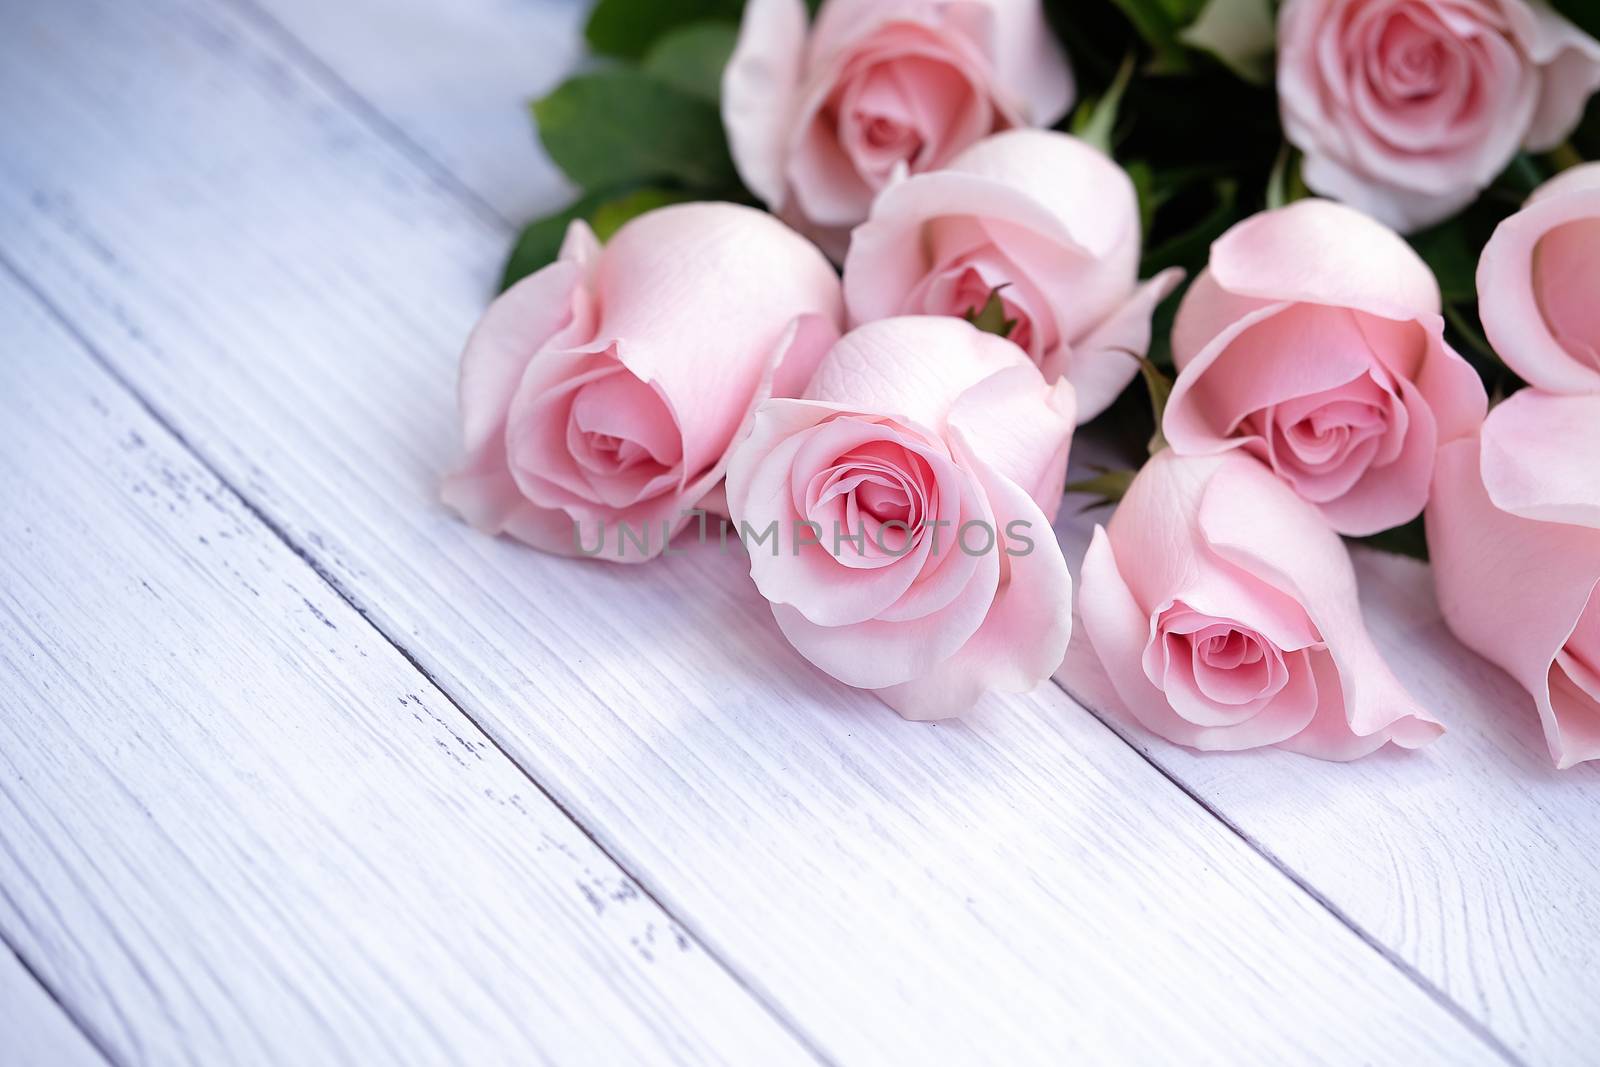 Beautiful bouquet of pink roses on cream-colored wood background. Selective focusing. Love, Romance, Valentine's Day, Anniversary.